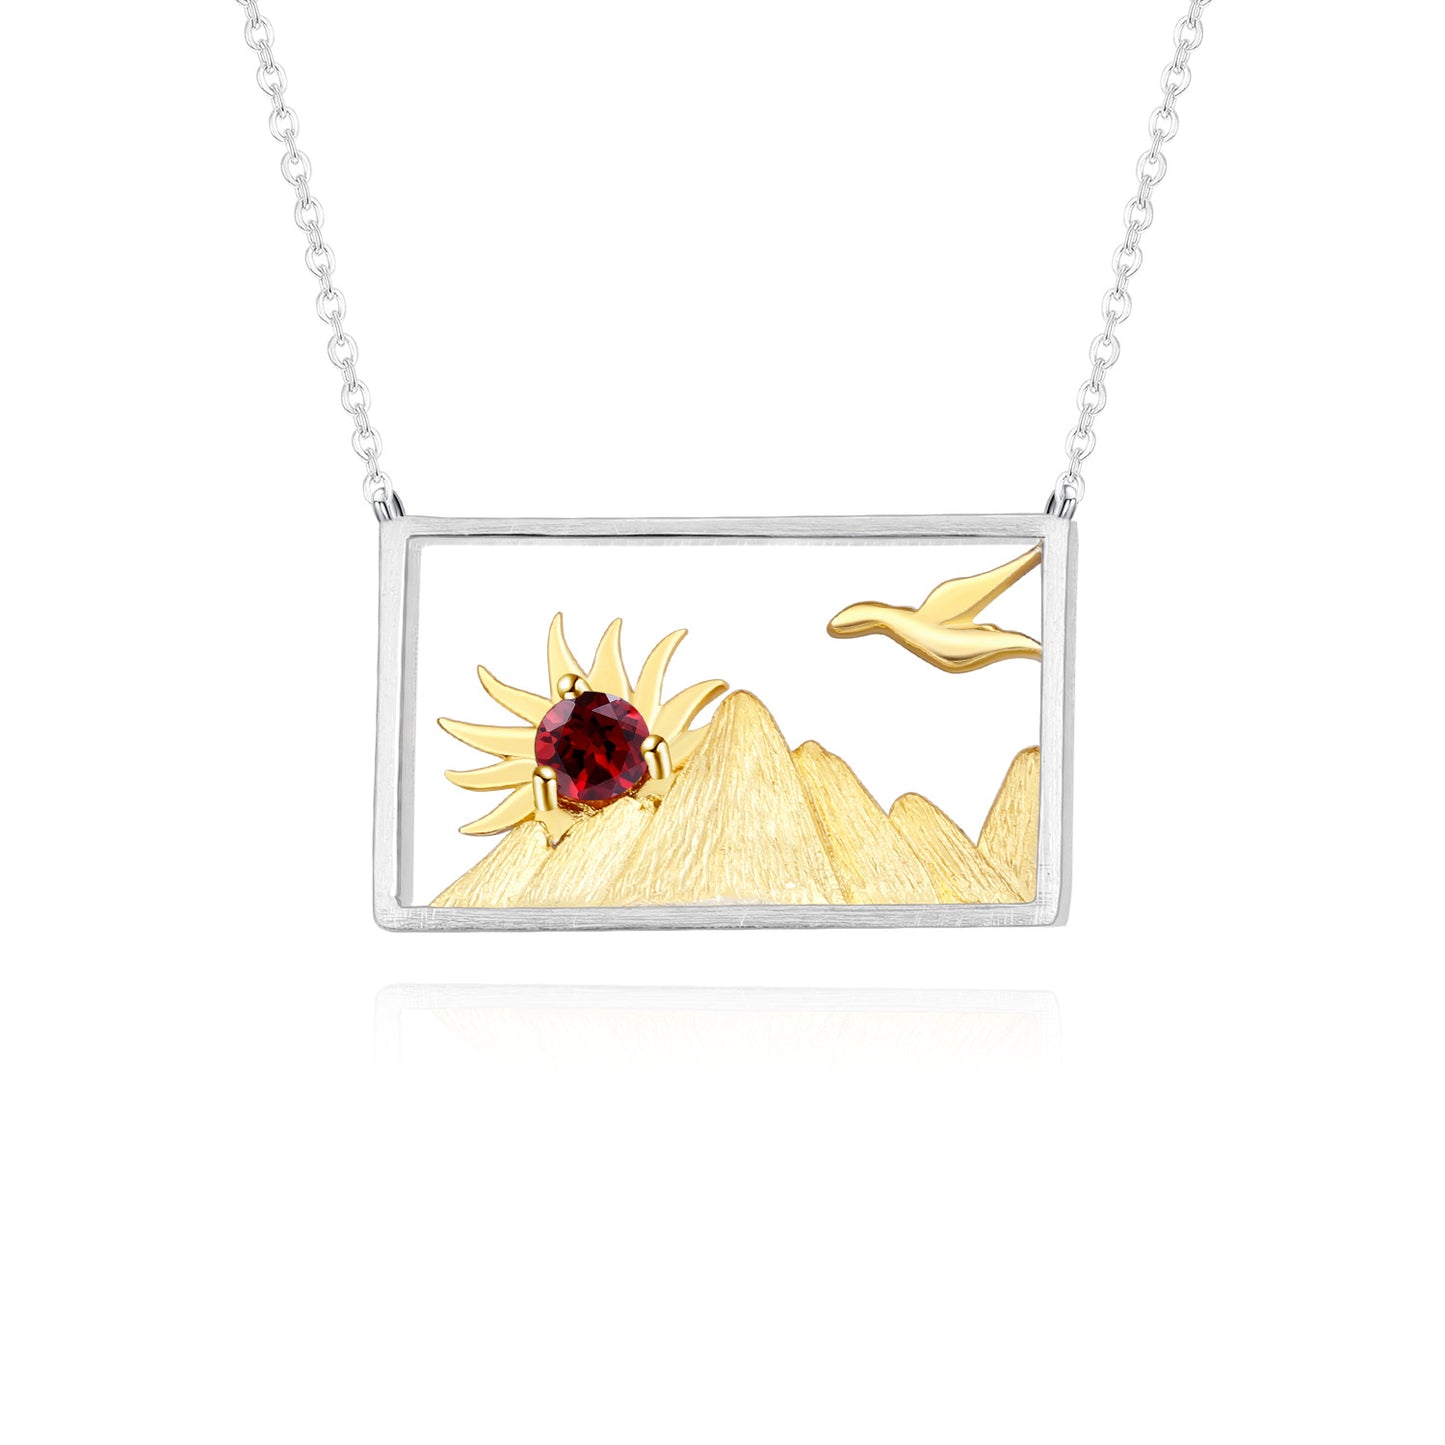 Fashion Design Inlaid Natural Colorful Gemstone Sunrise and Sunset Rectangle Pendant Silver Necklace for Women